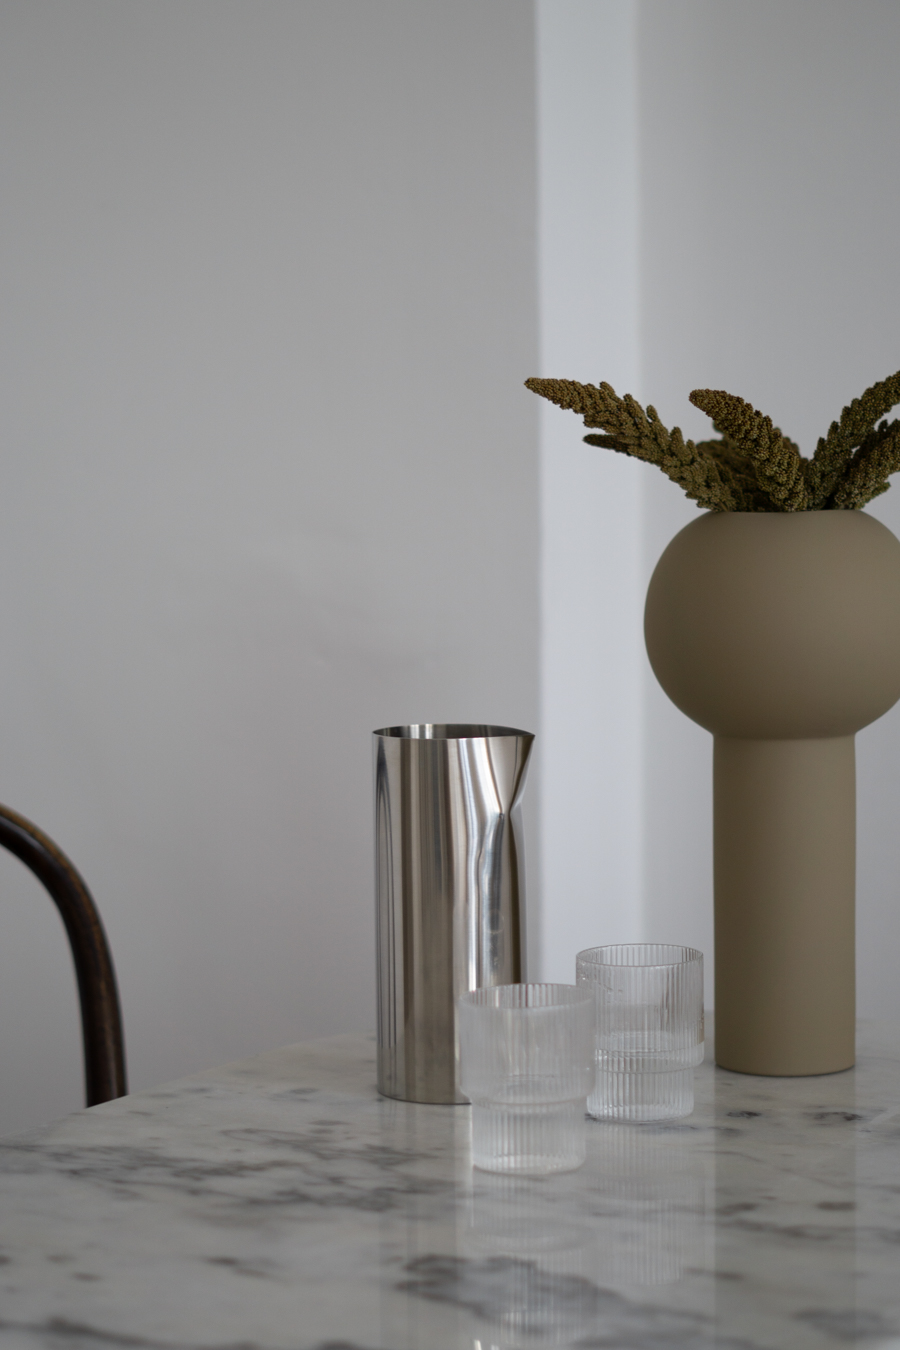 Fall Decor, New Works Pleat Pitcher, Cooee Design Vase, Ferm Living Glasses, Neutral Aesthetic, Scandinavian Home